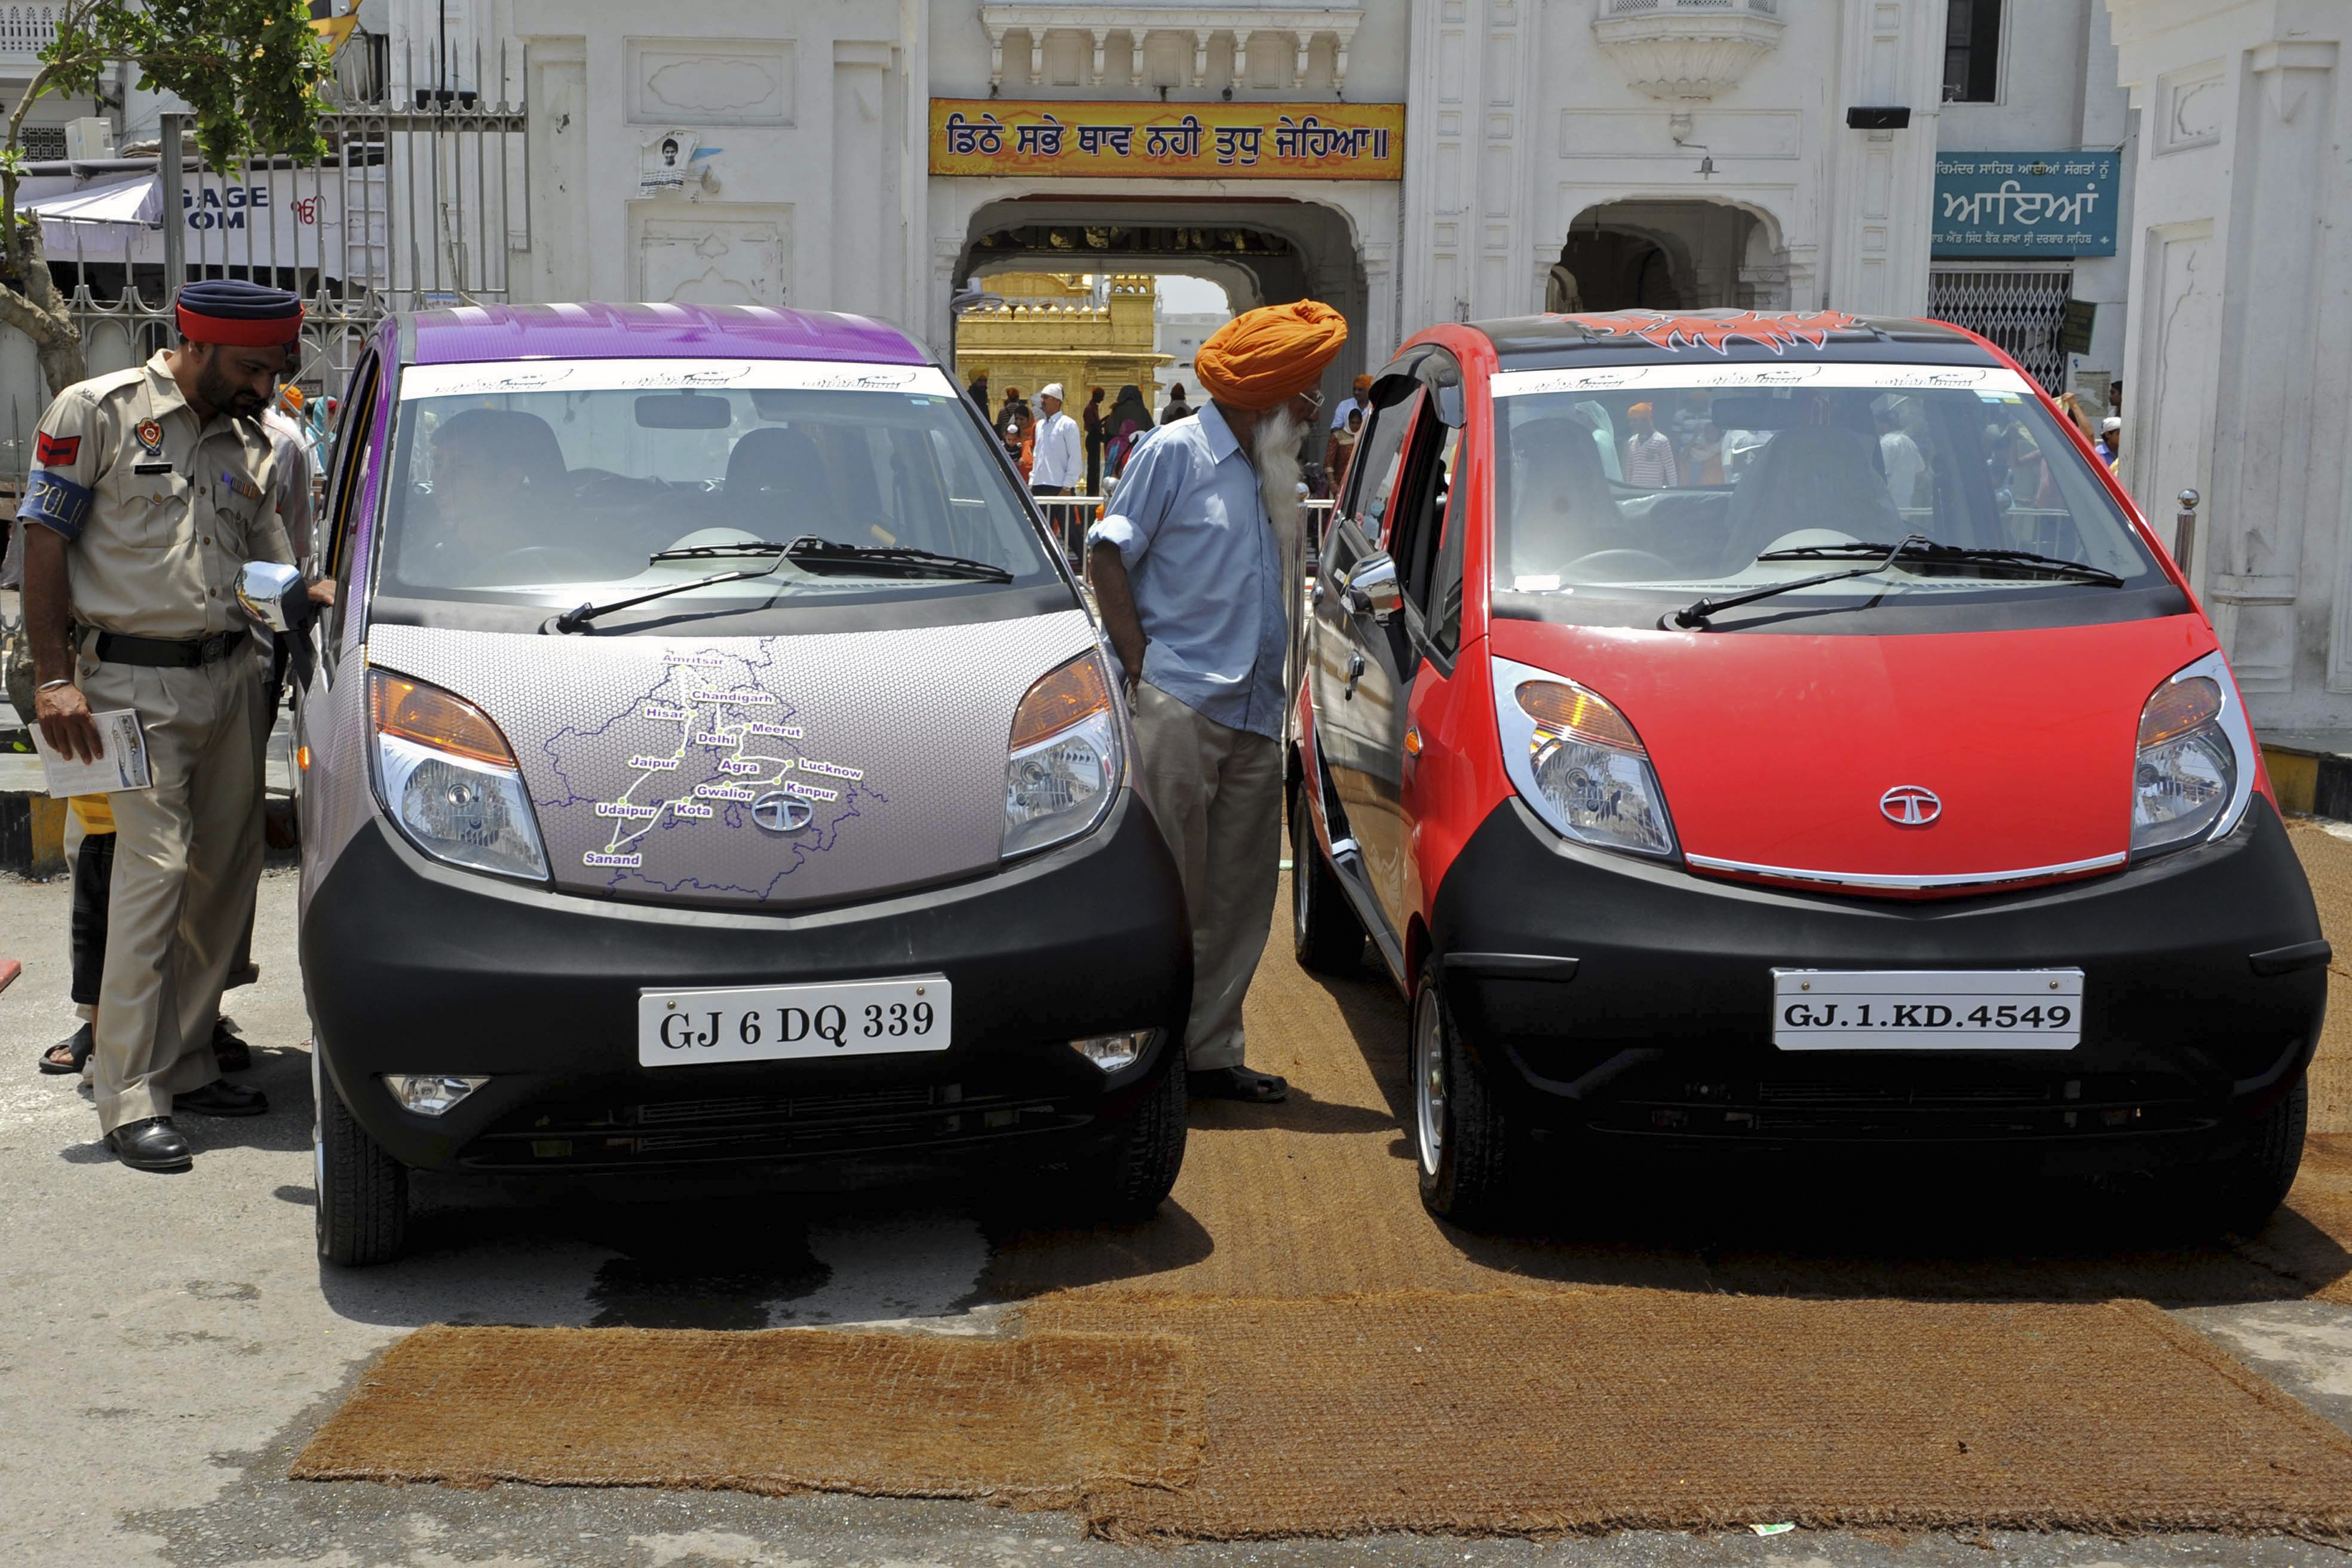 Bystanders take a closer look at Tata's Nano cars, billed as the "world's cheapest cars,"  in Amritsar, India, on June 9, 2010. (NARINDER NANU—AFP/Getty Images)